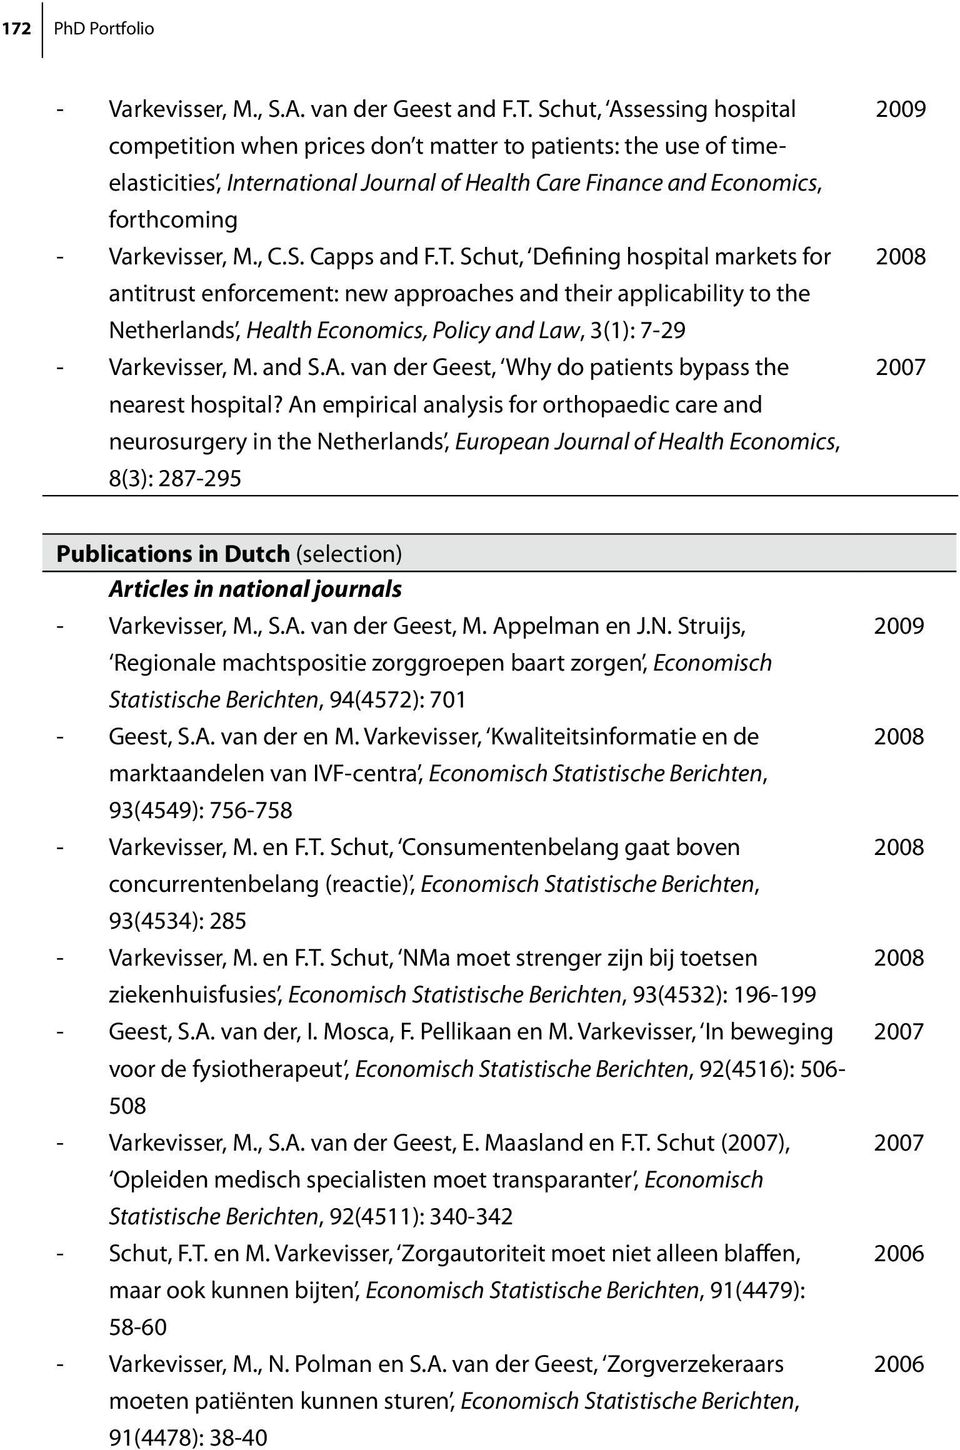 T. Schut, Defining hospital markets for antitrust enforcement: new approaches and their applicability to the Netherlands, Health Economics, Policy and Law, 3(1): 7-29 - Varkevisser, M. and S.A.